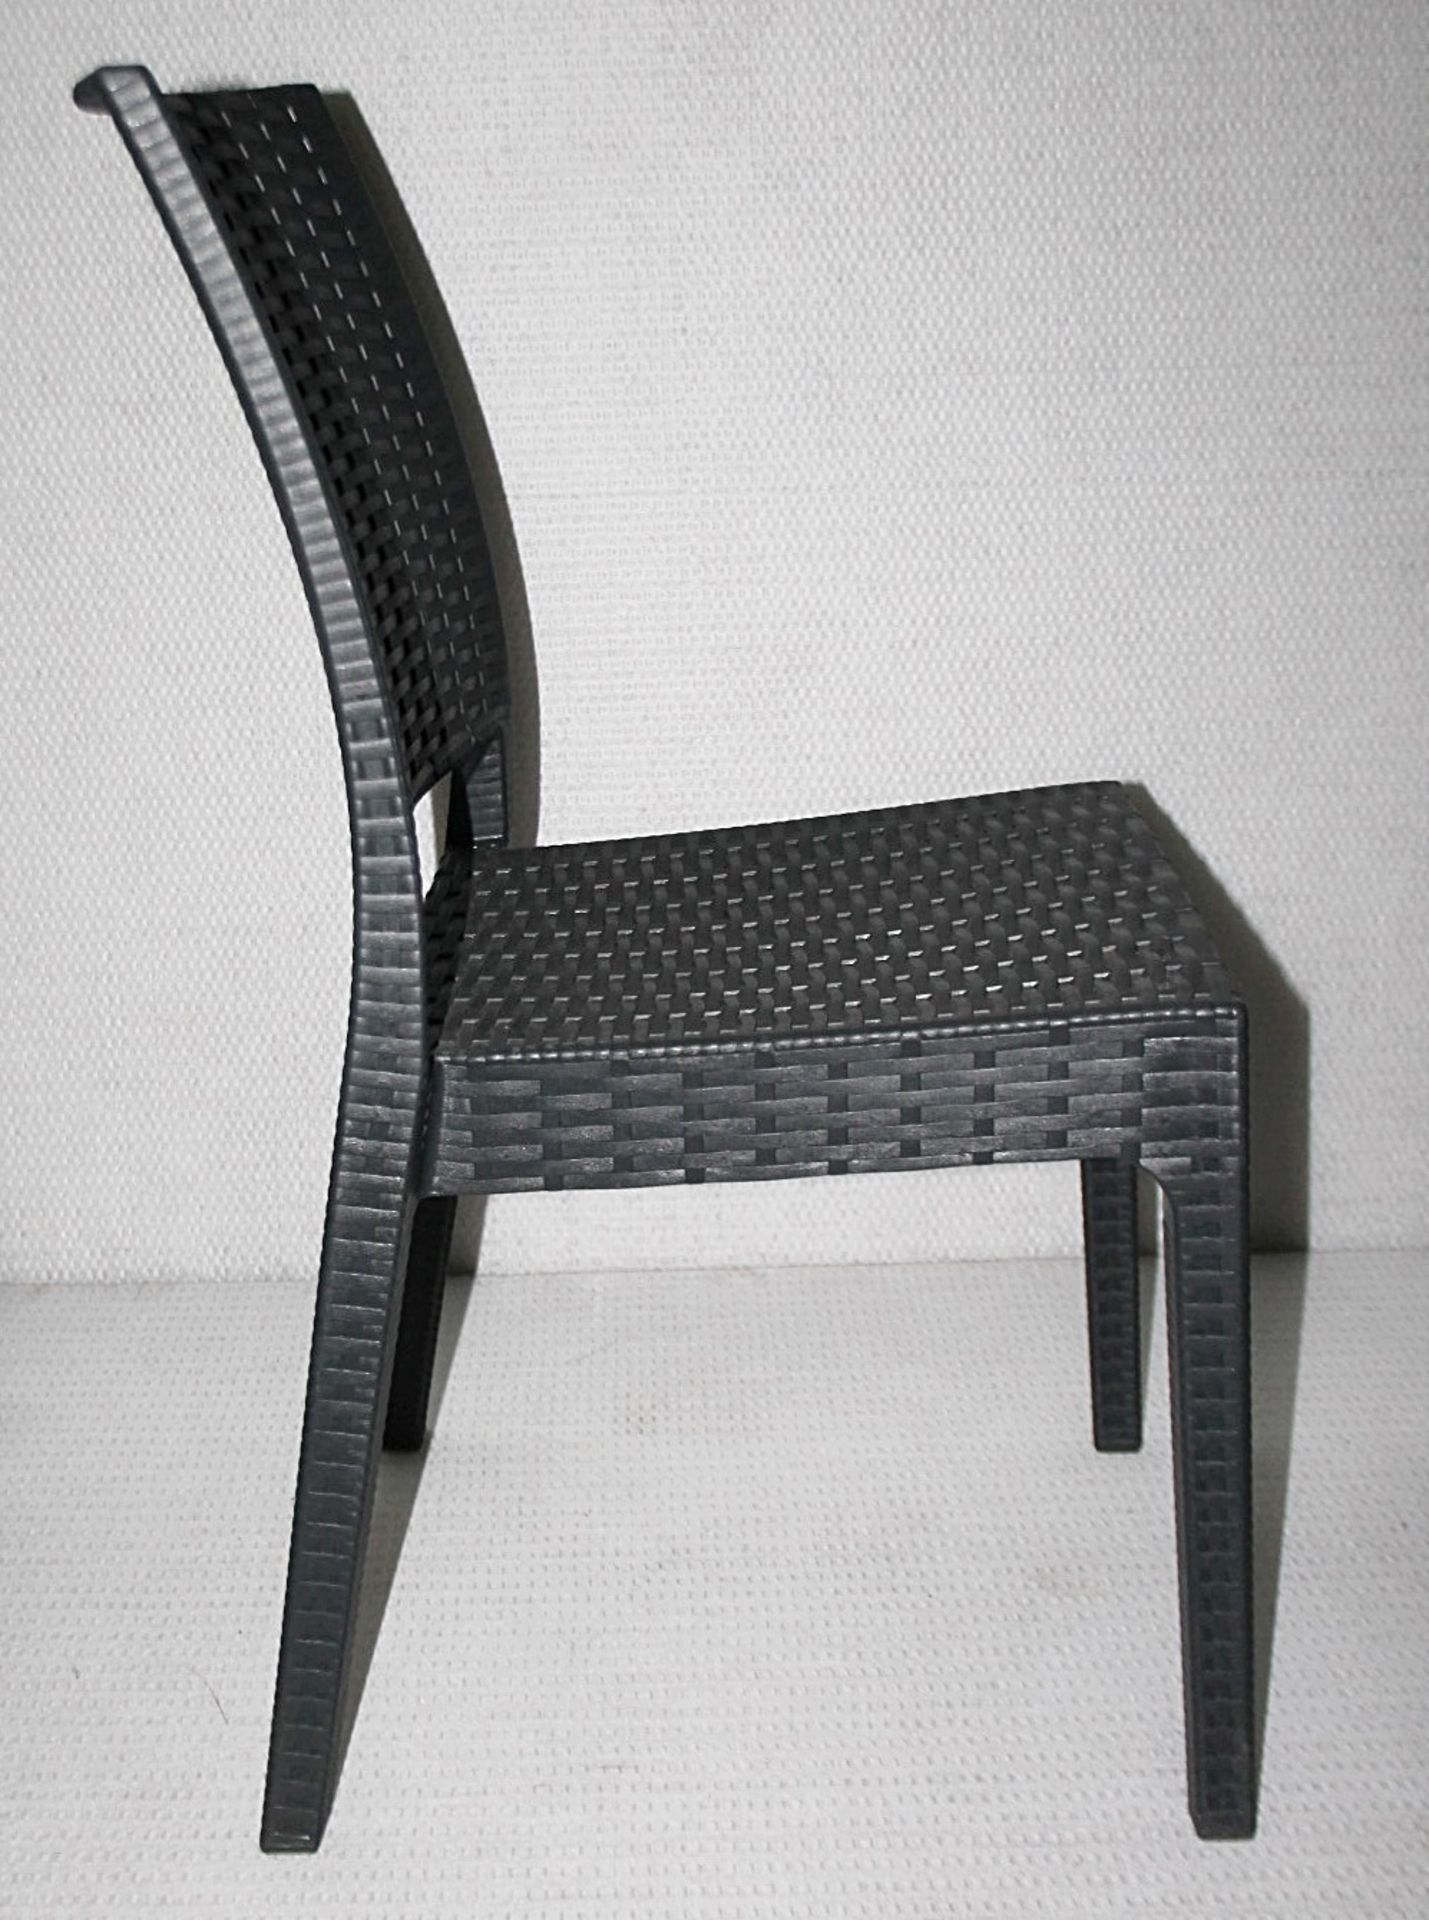 4 x Siesta 'Florida' Rattan Style Garden Chairs In Dark Grey - Suitable For Commercial or Home Use - - Image 13 of 14